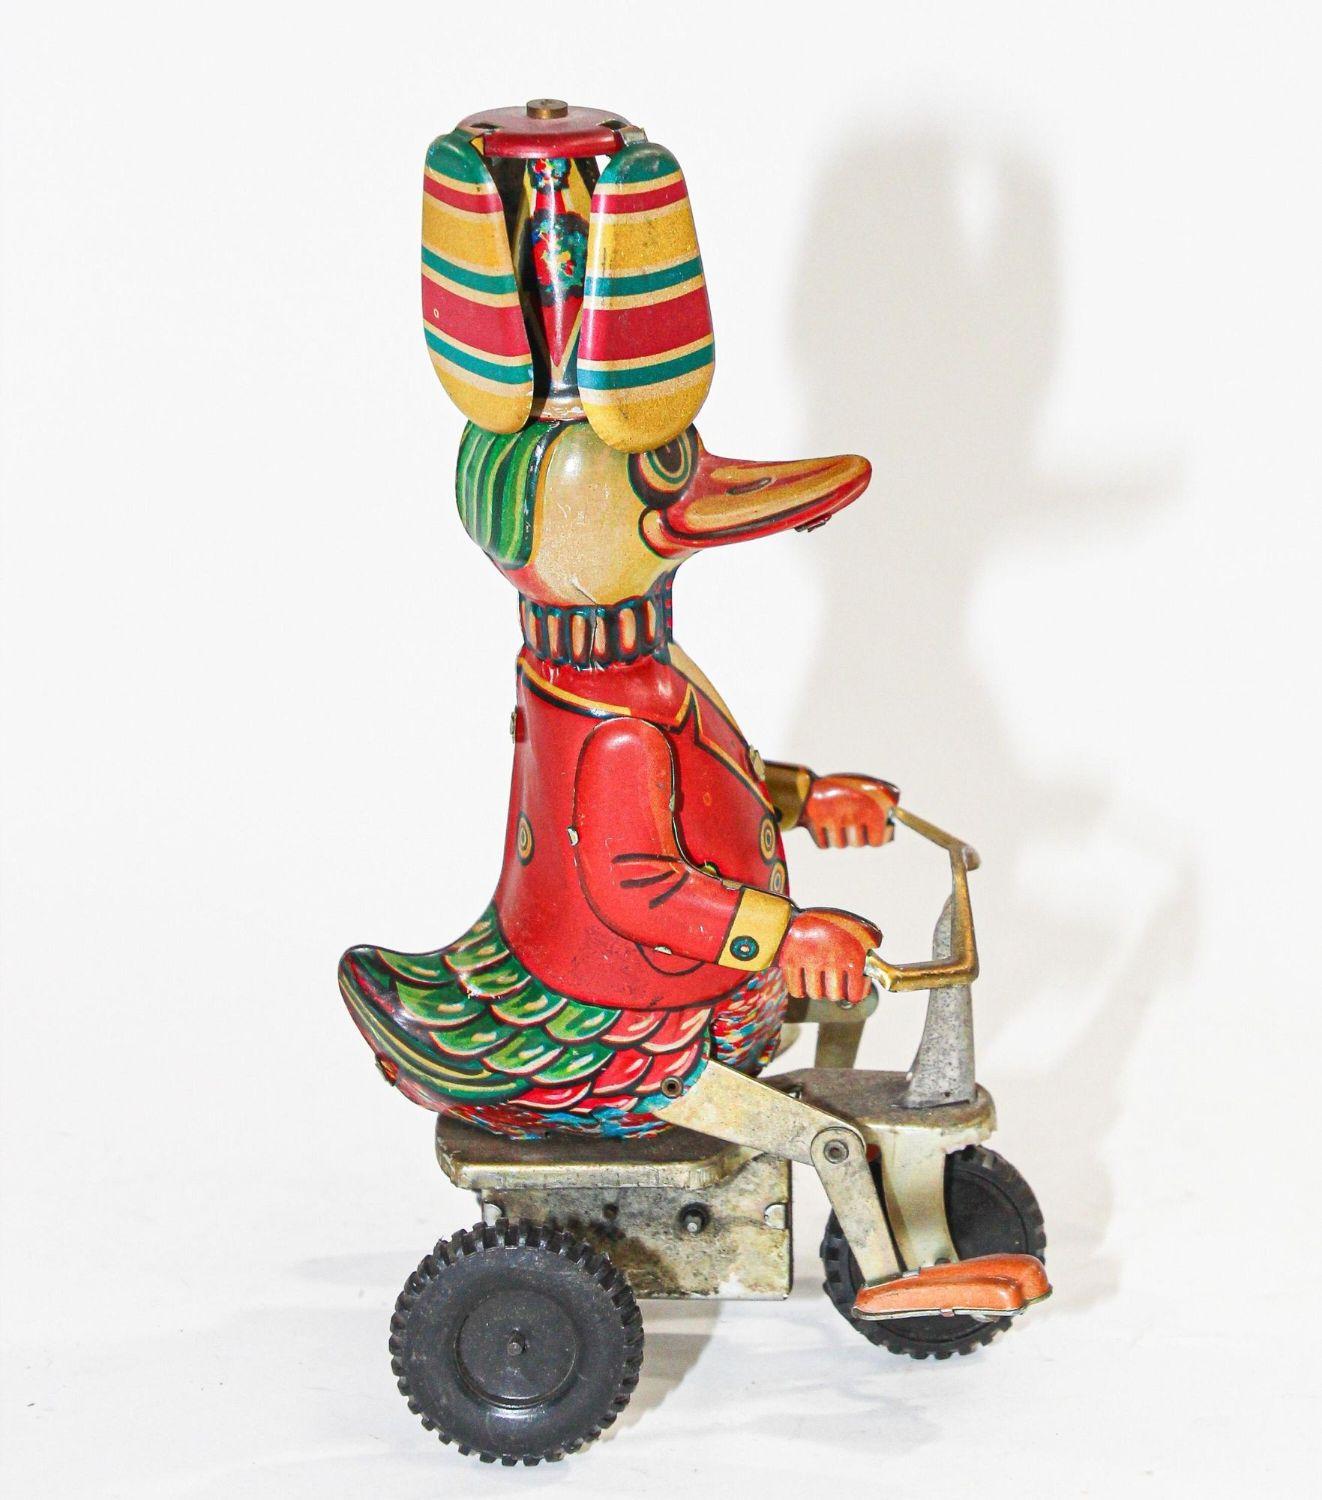 Hand-Crafted Vintage Mechanical Hand-Painted Wind-Up Duck on Bike